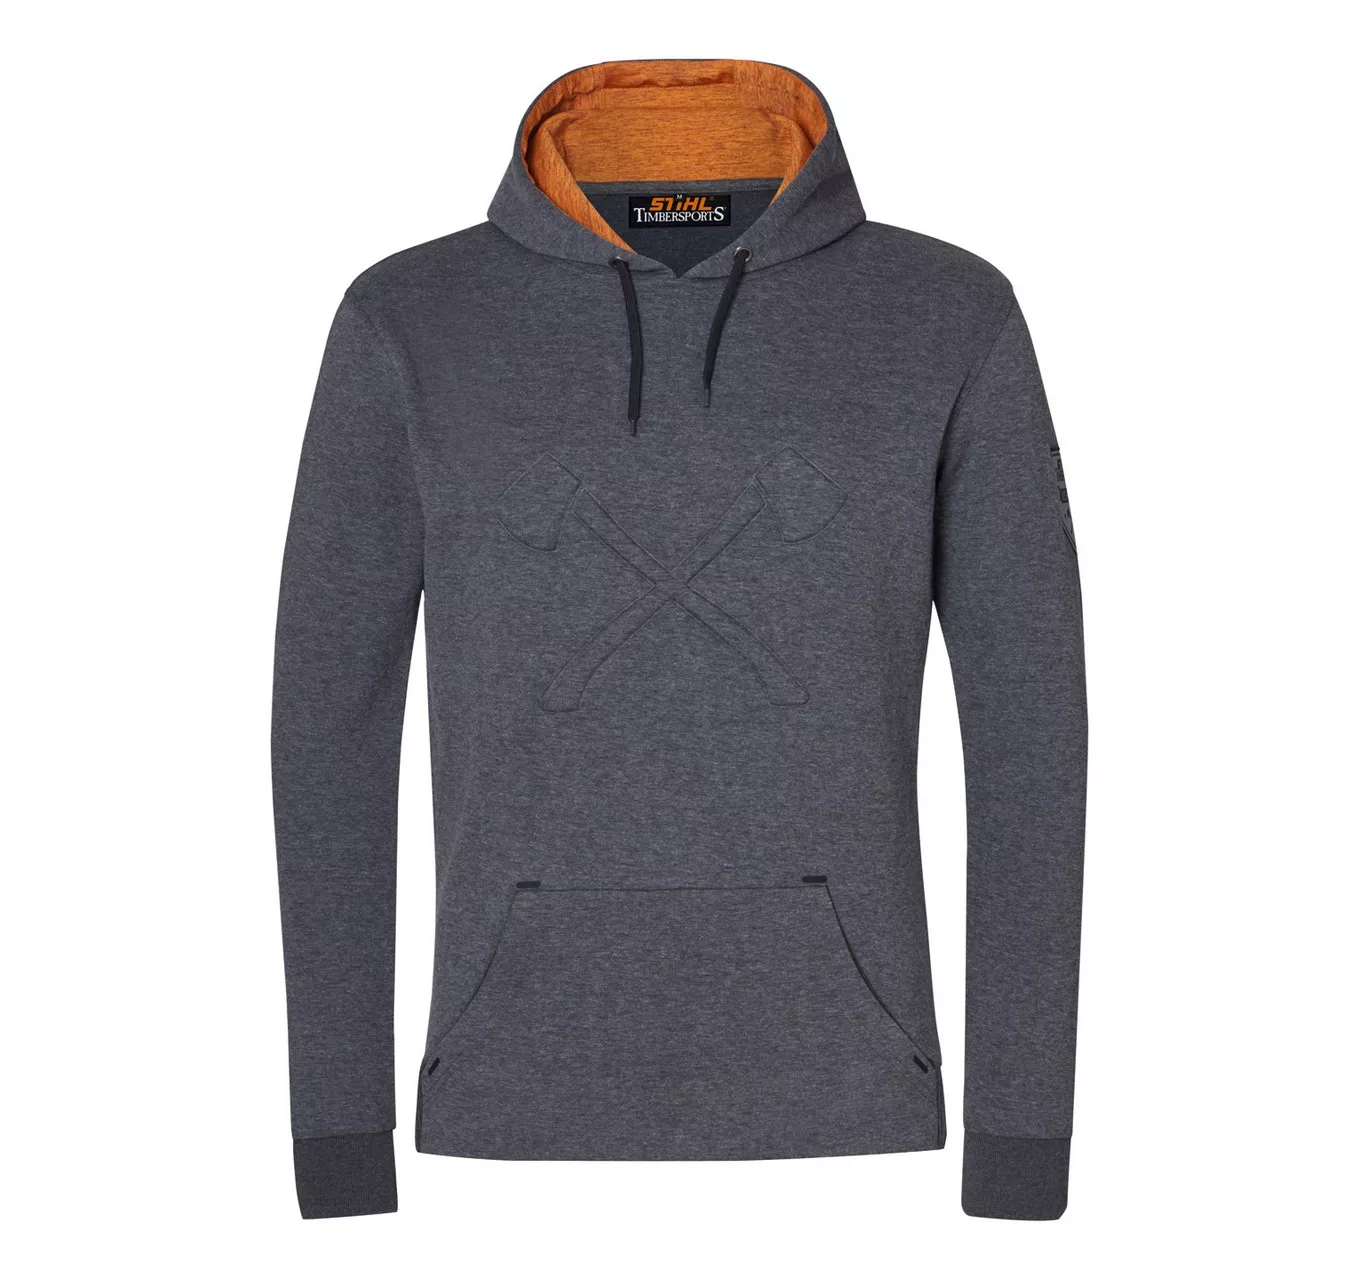 Timbersports AXE Hoodie L